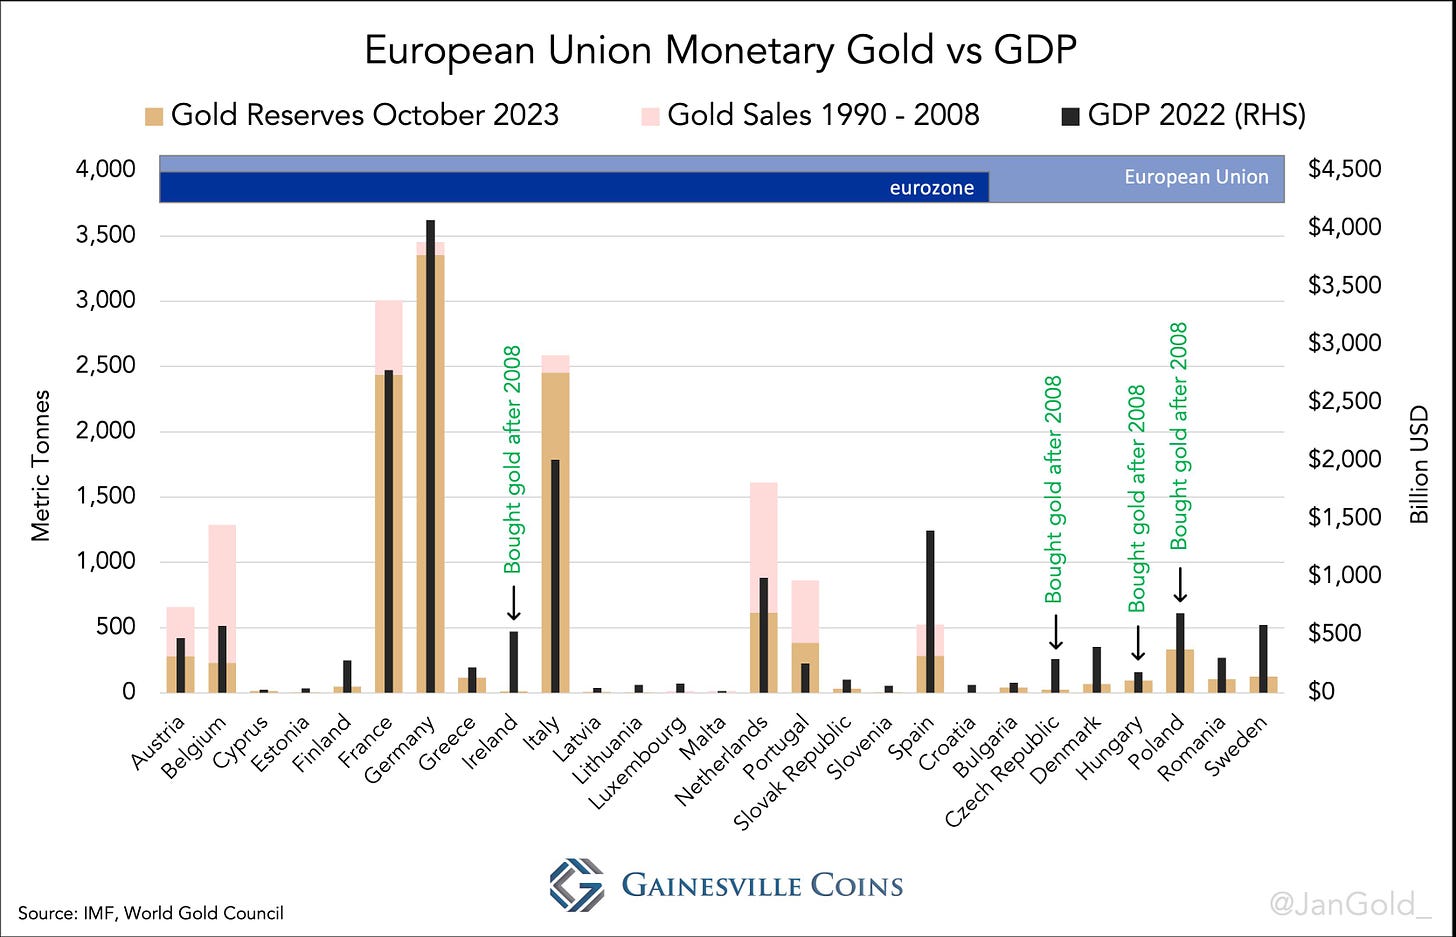 chart comparing the ratios of monetary gold to GDP in the EU